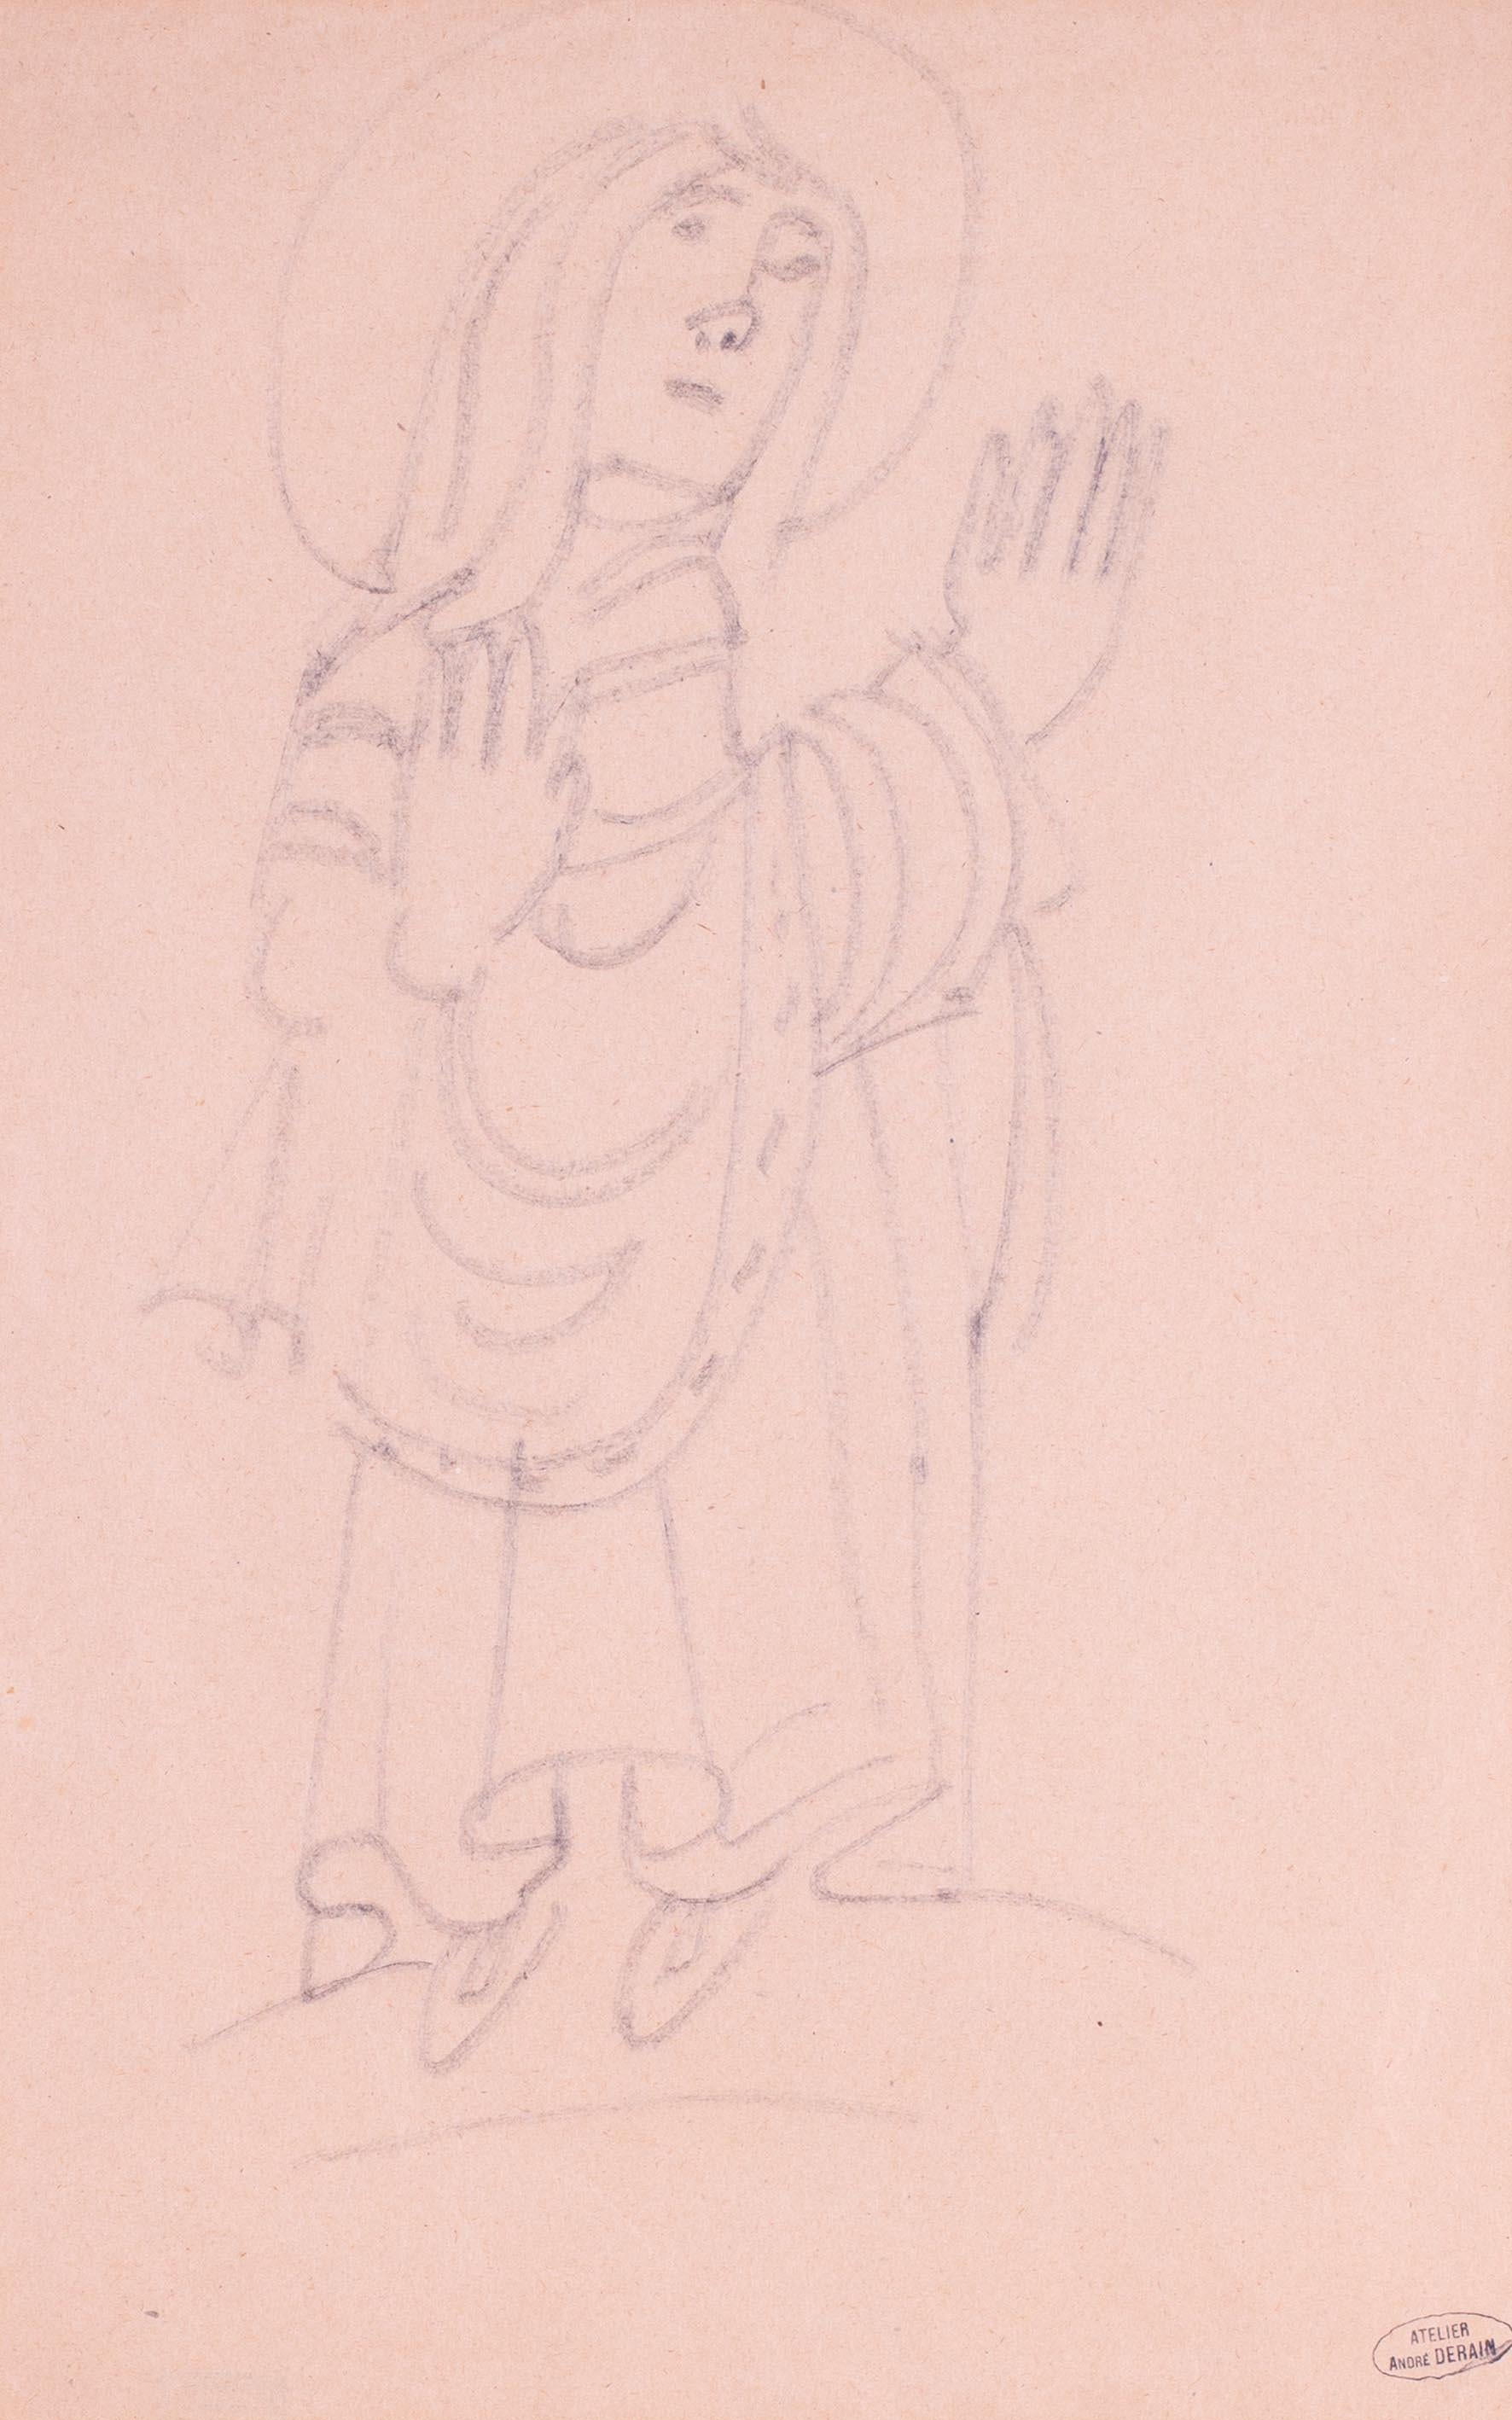 Early 20th Century French Fauvist drawing by Andre Derain of a Saint - Art by André Derain